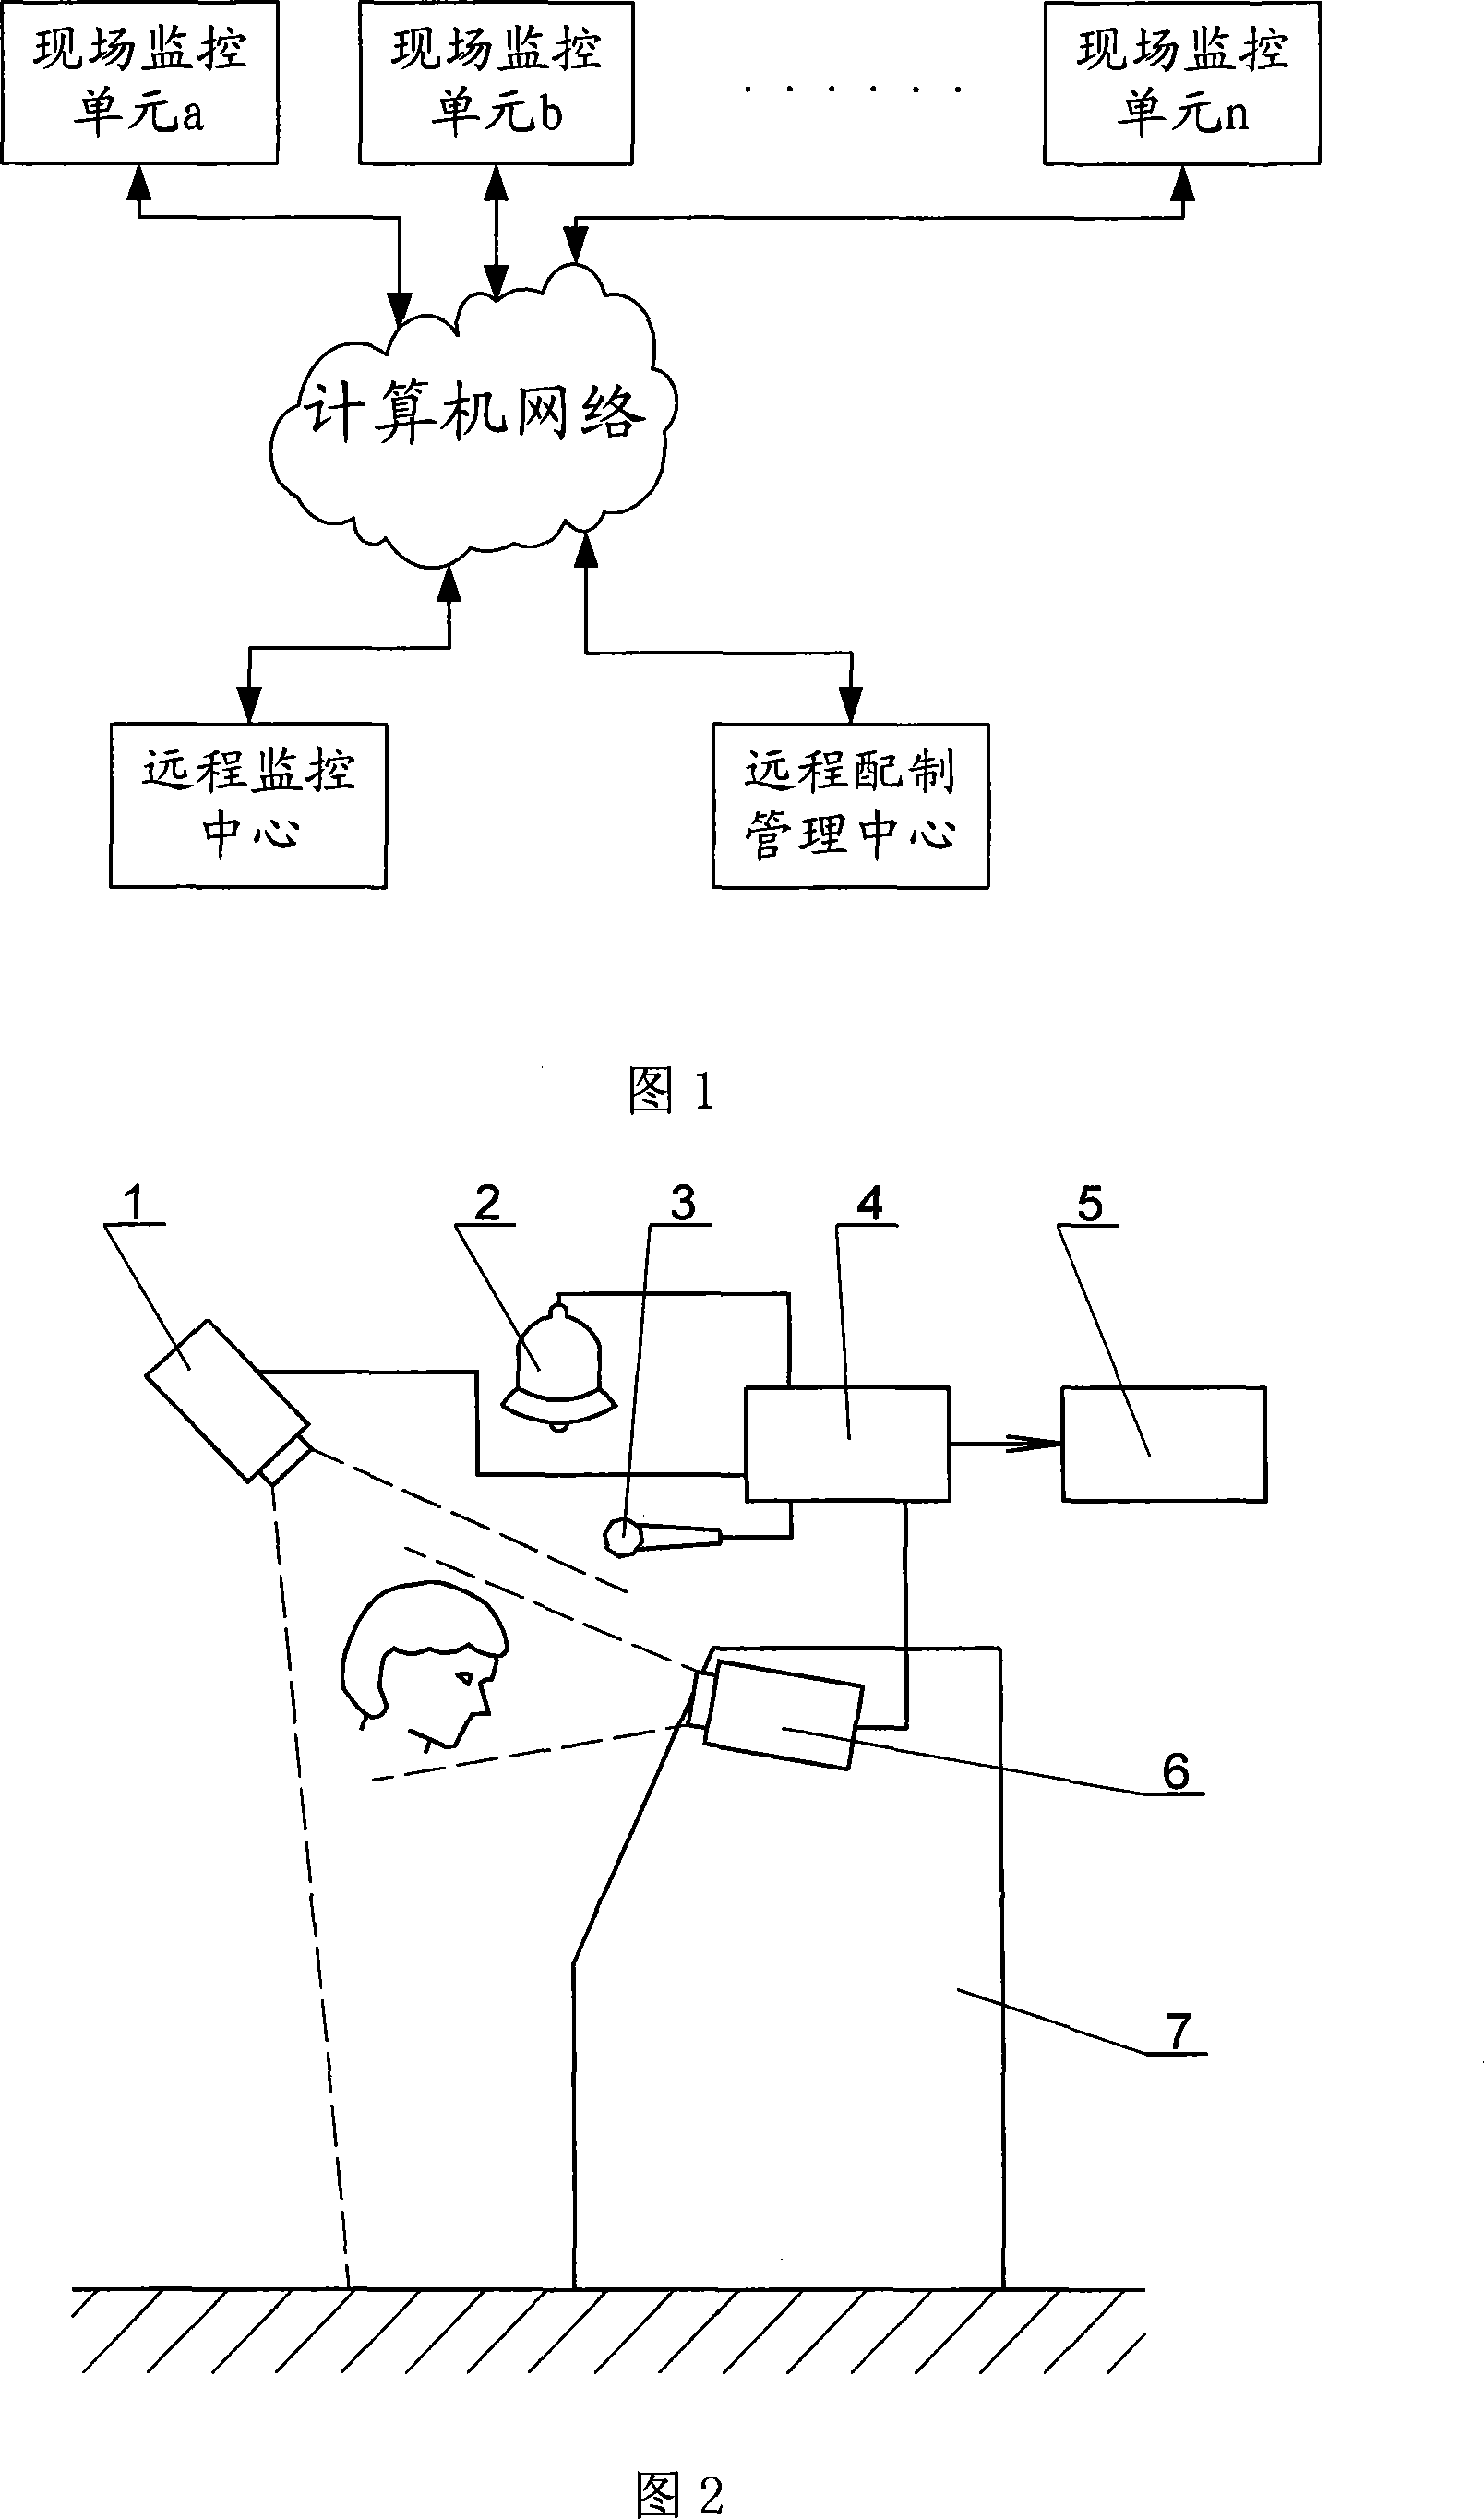 Intelligent monitoring system and method for self-help bank and ATM